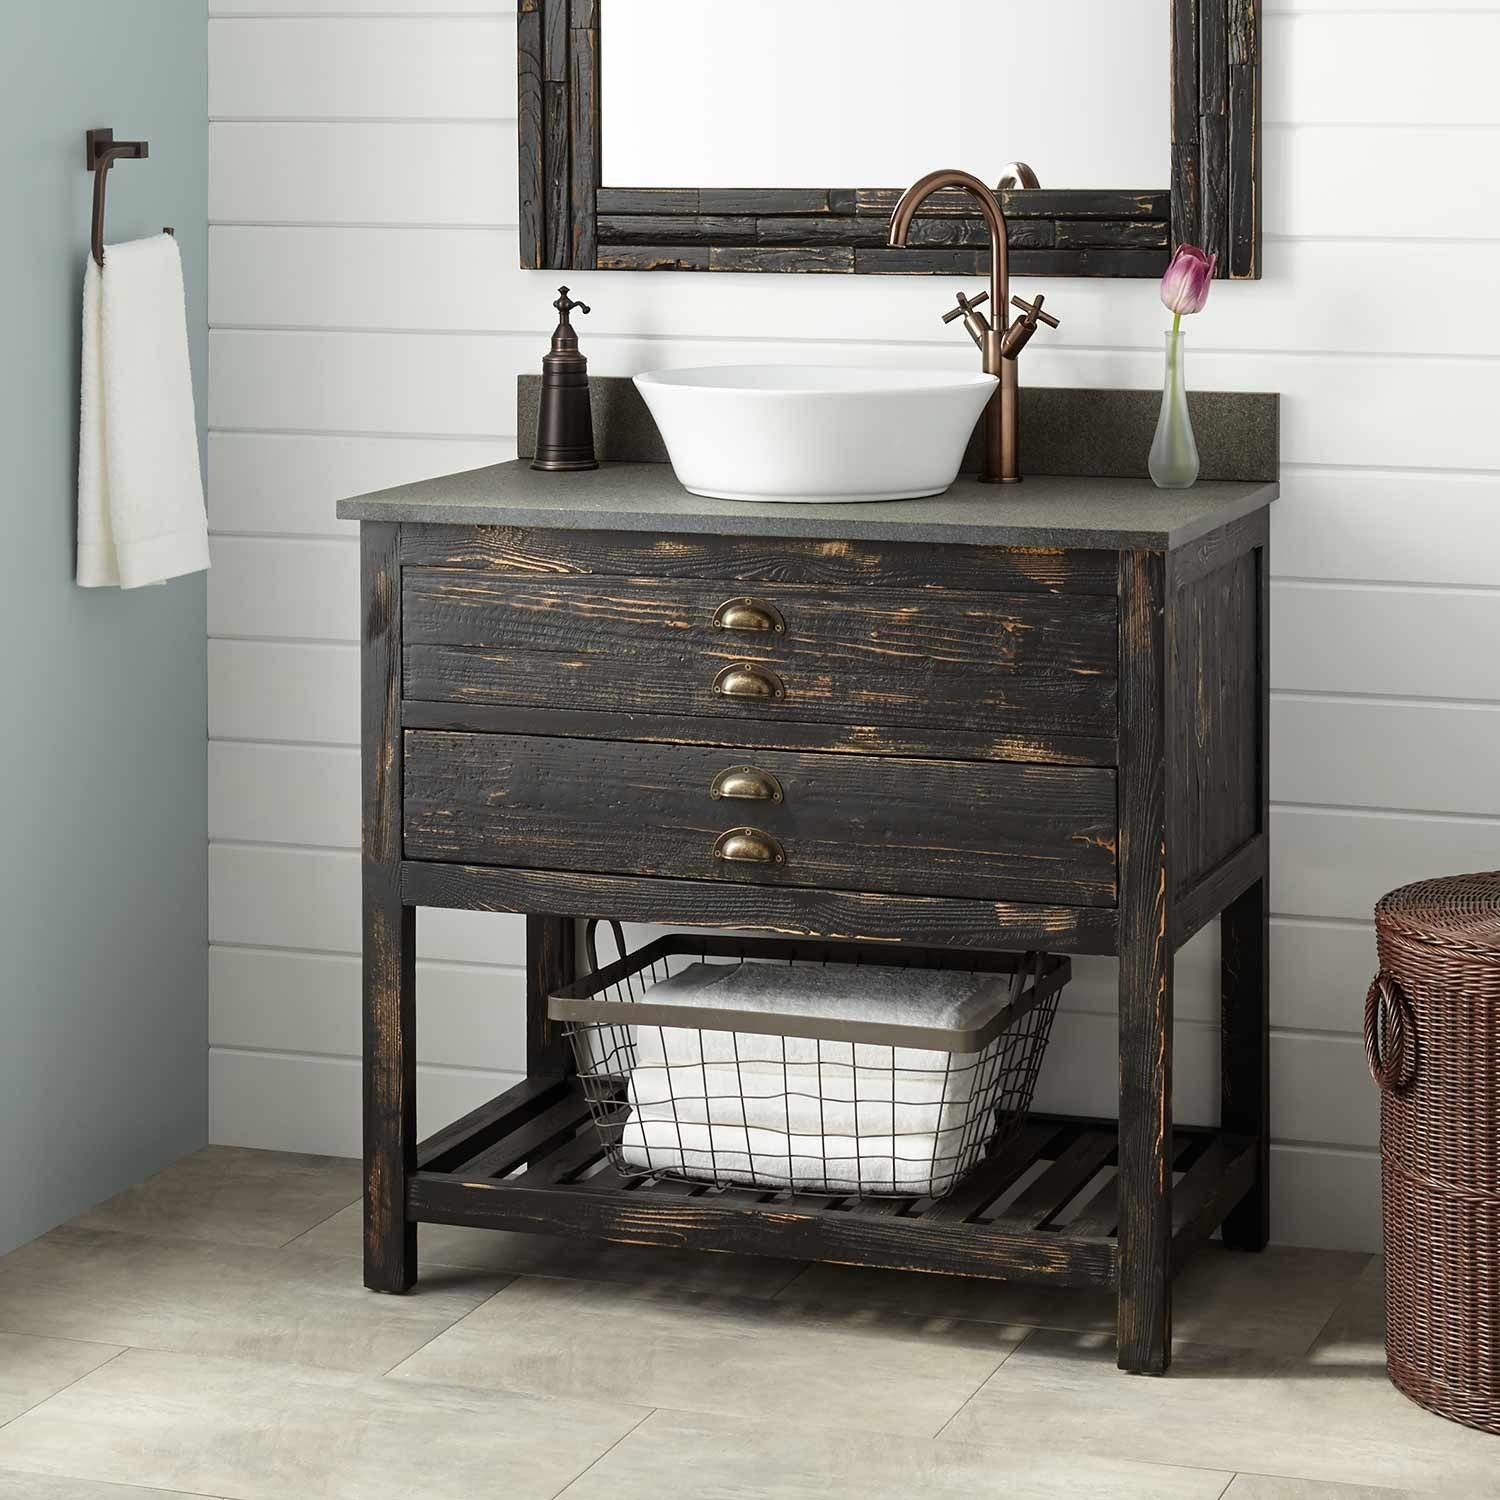 36 Benoist Reclaimed Wood Vessel Sink Console Vanity Antique pertaining to sizing 1500 X 1500